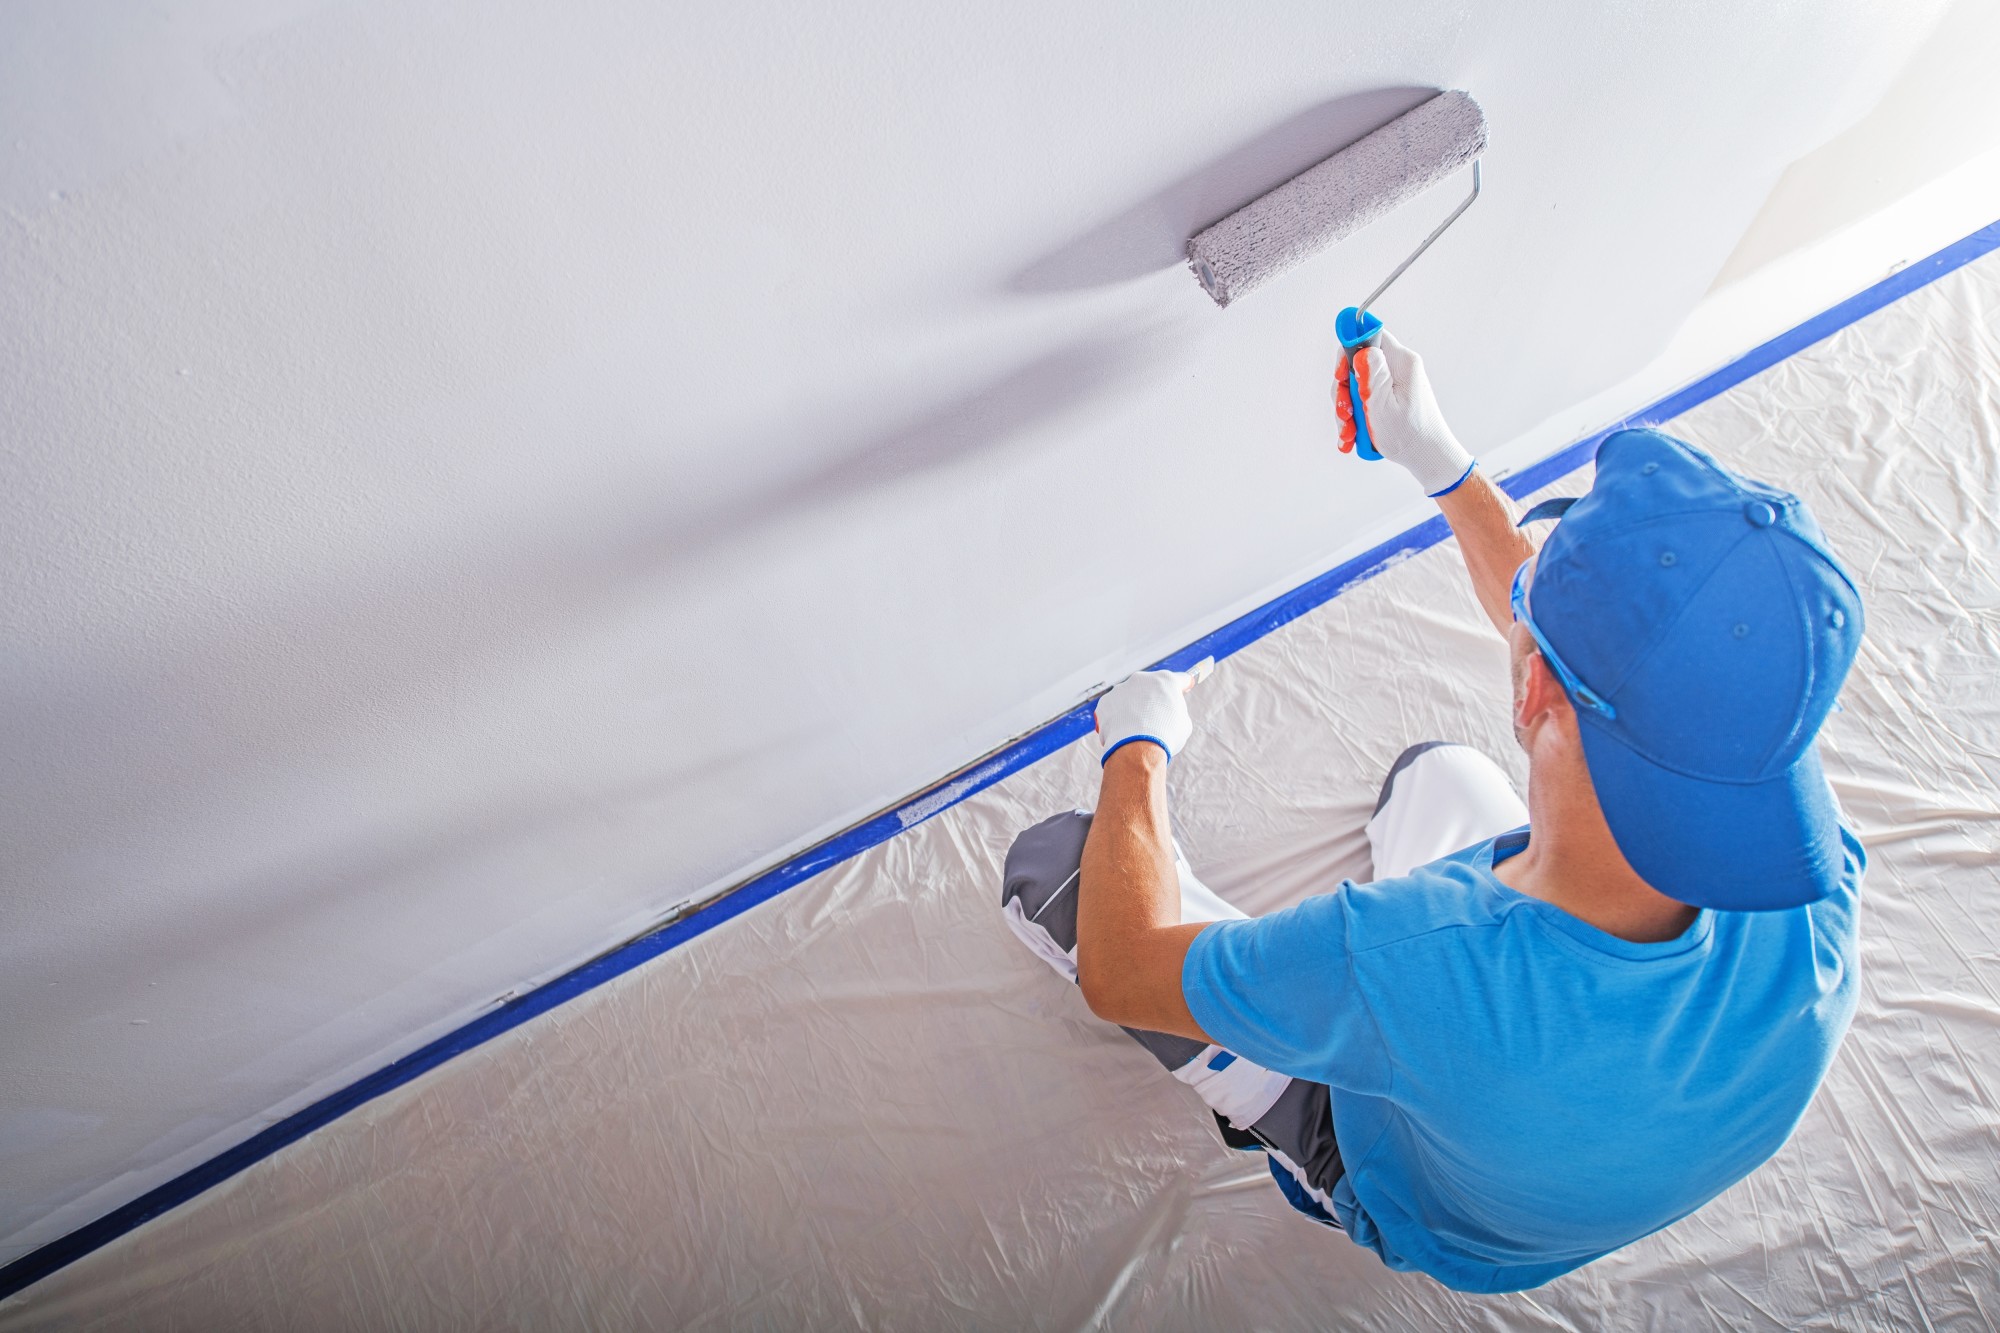 Six Benefits of Hiring a Professional House Painter